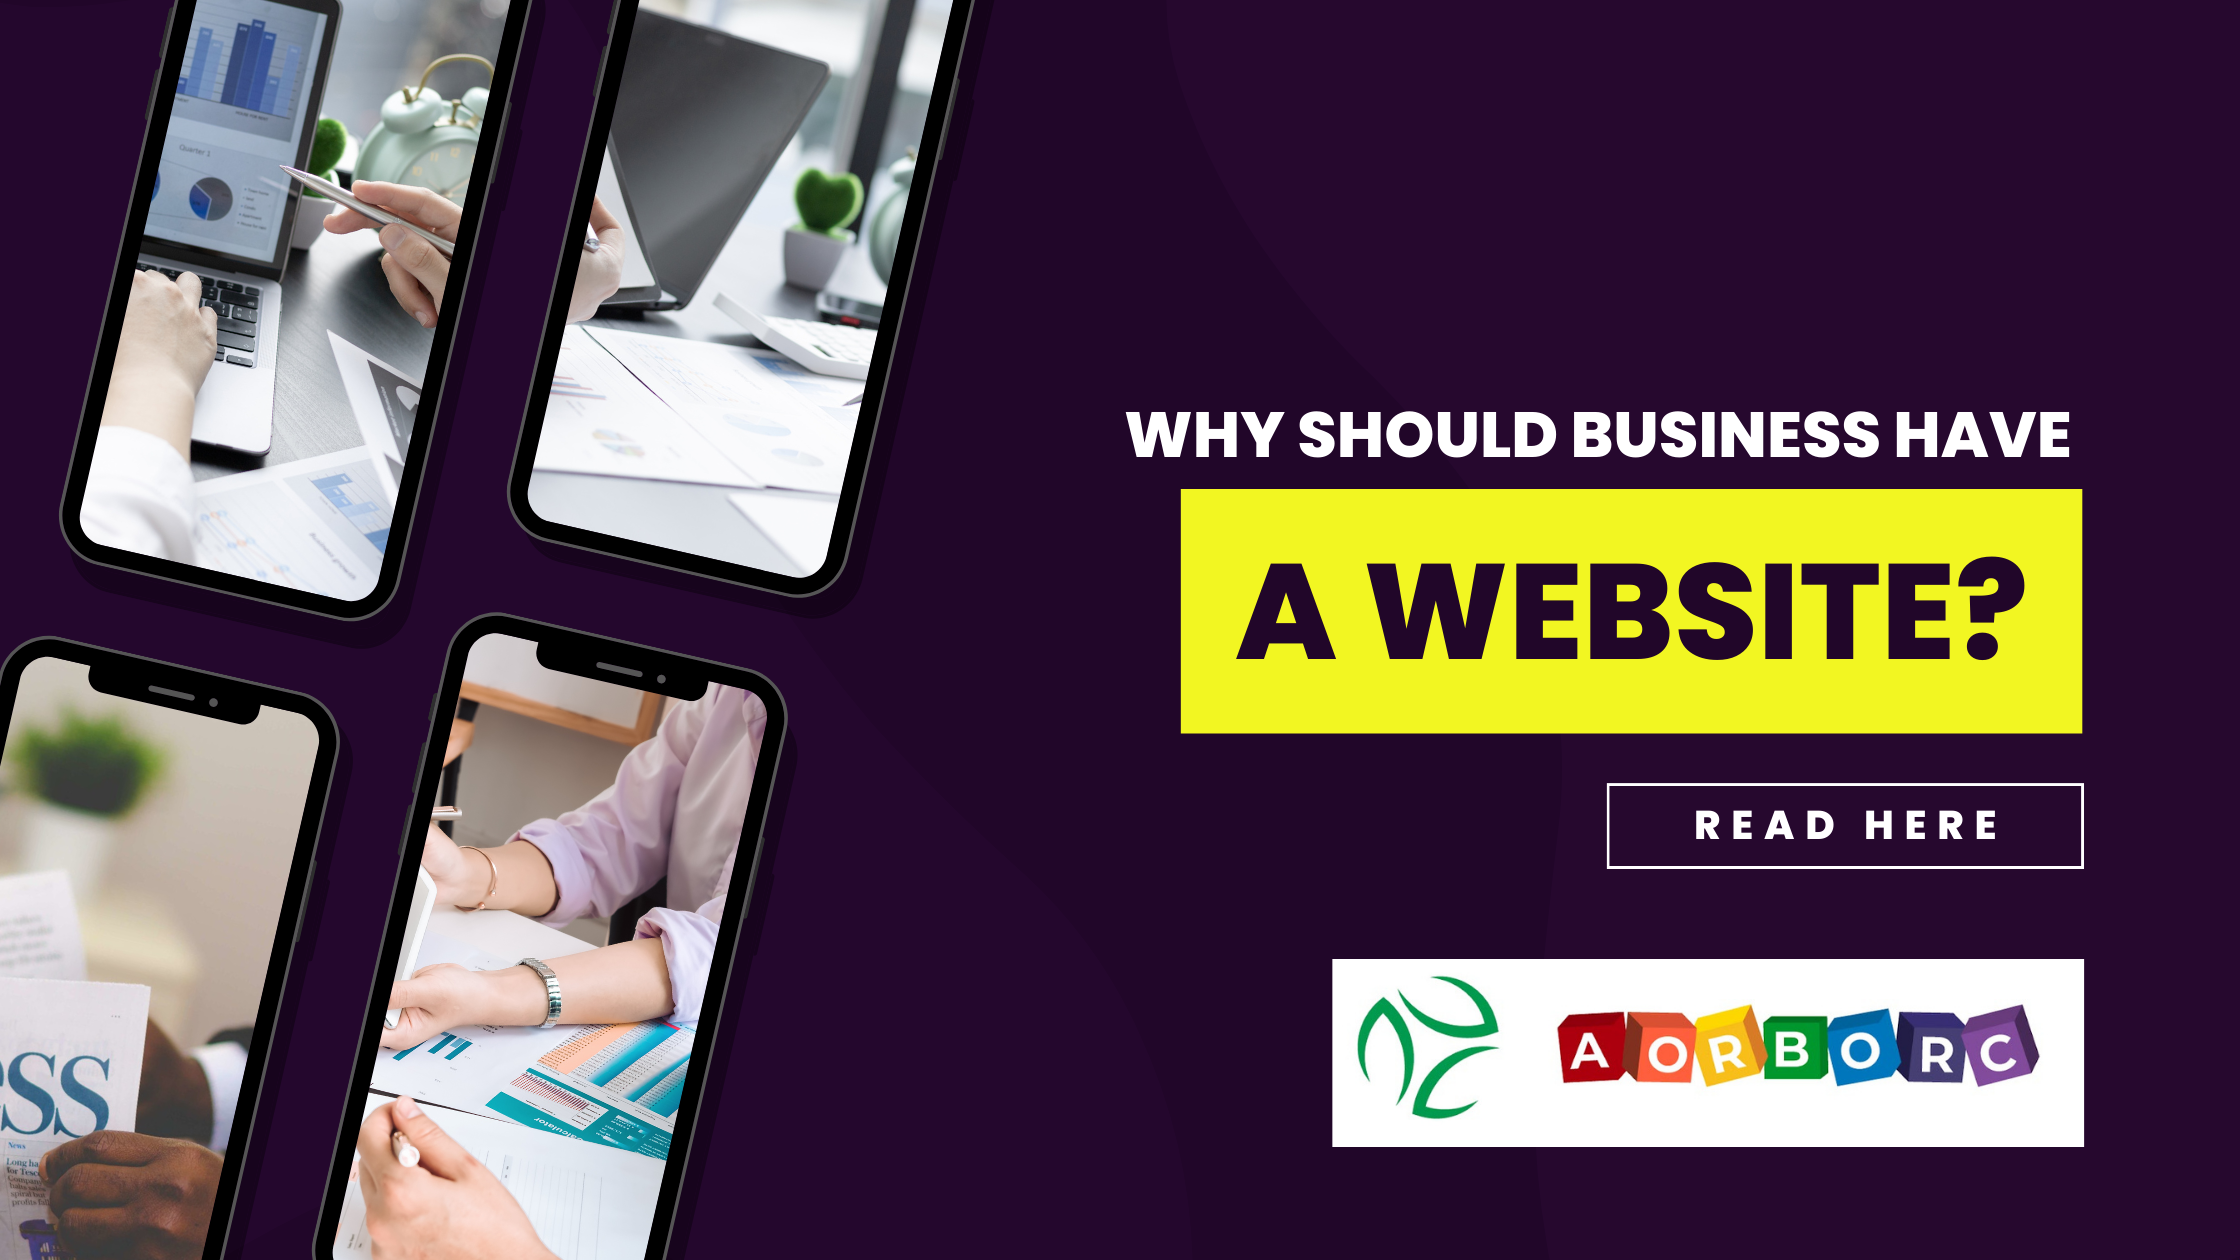 Why should businesses have a website?